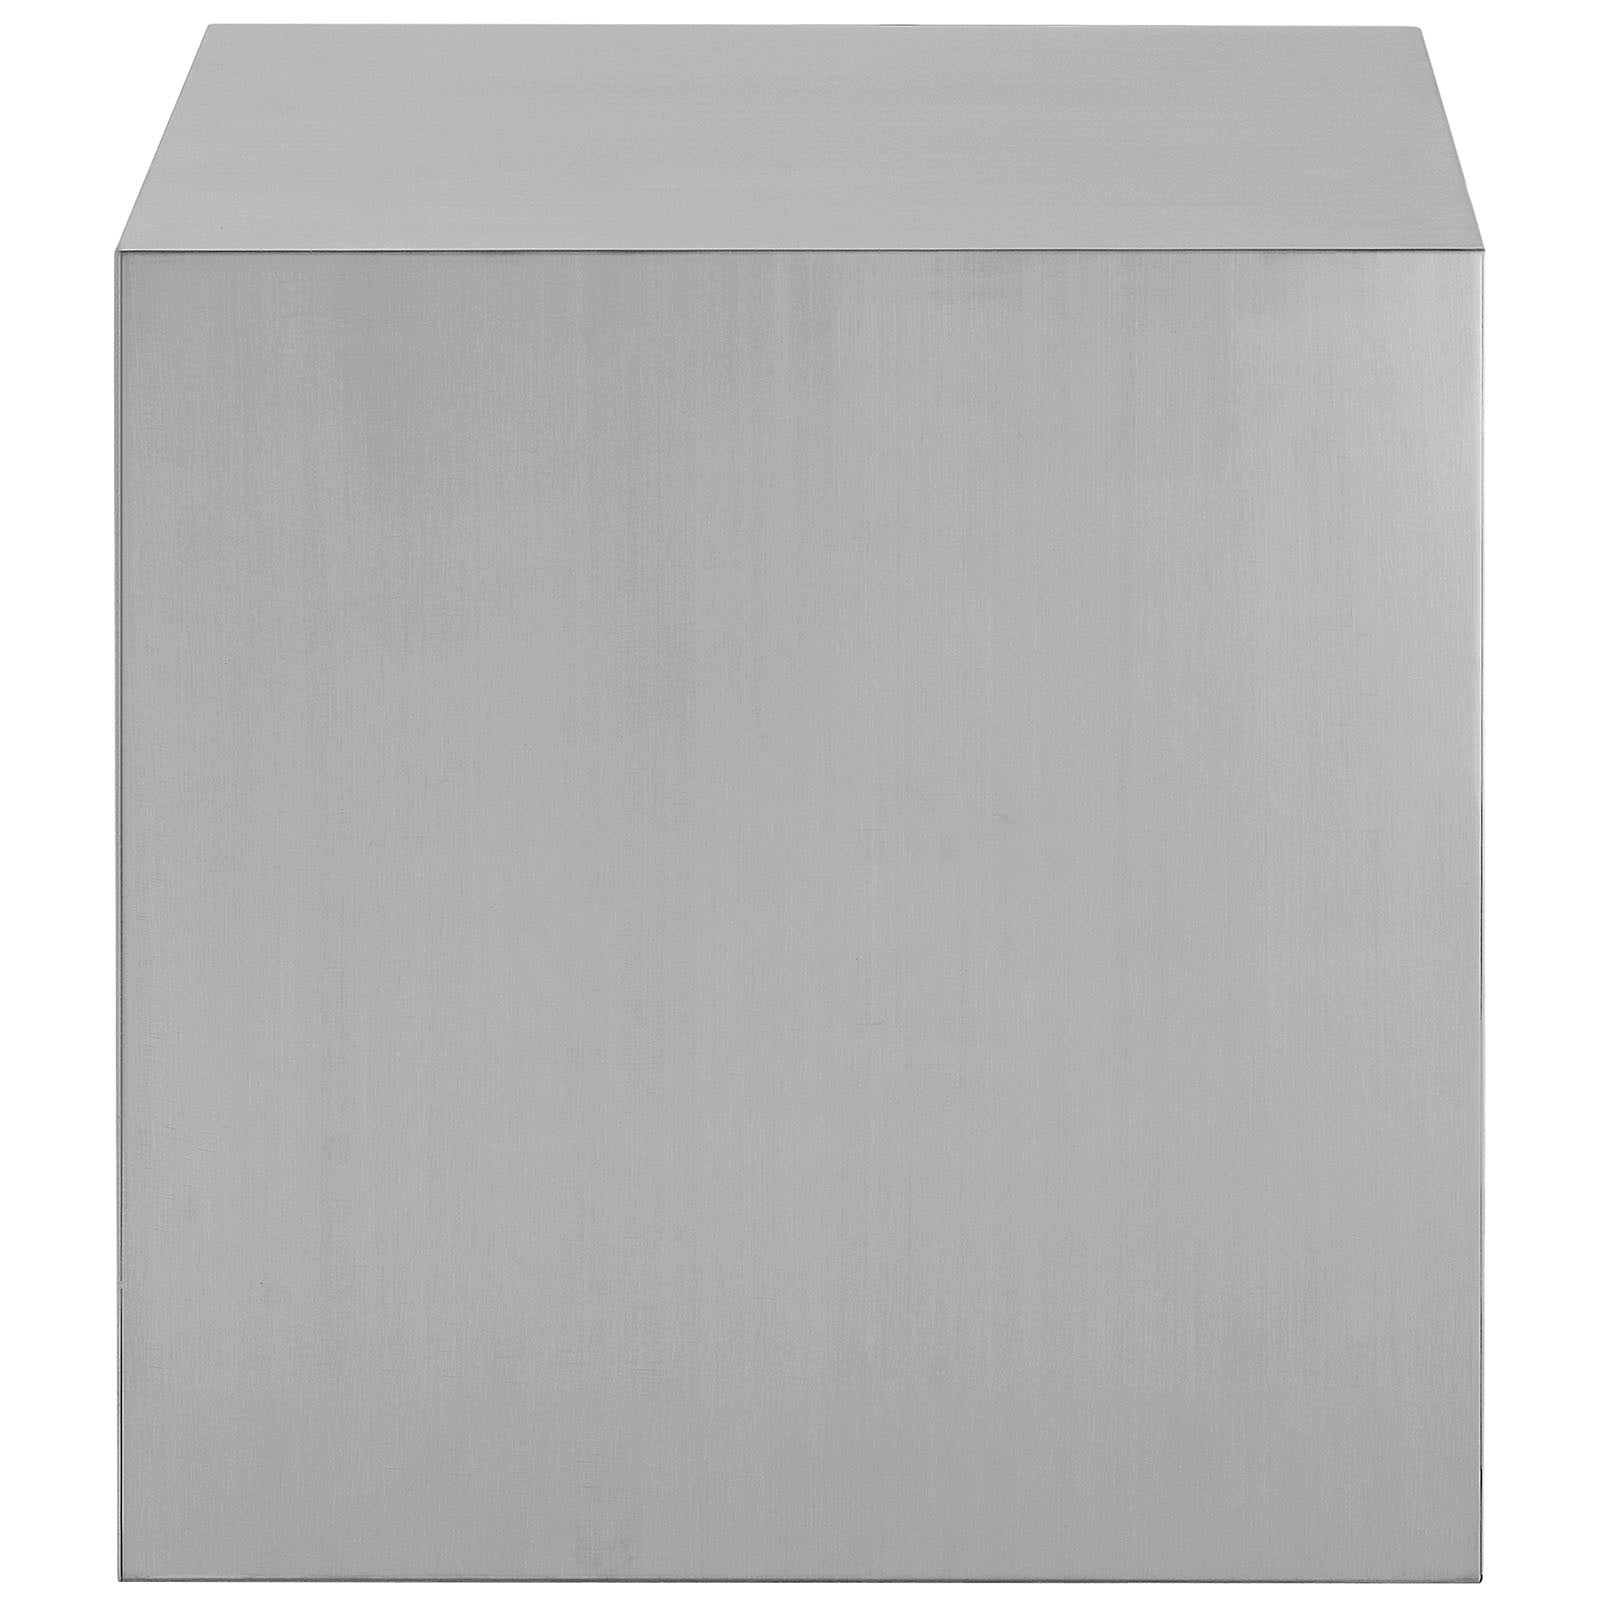 Cast Stainless Steel Side Table - East Shore Modern Home Furnishings